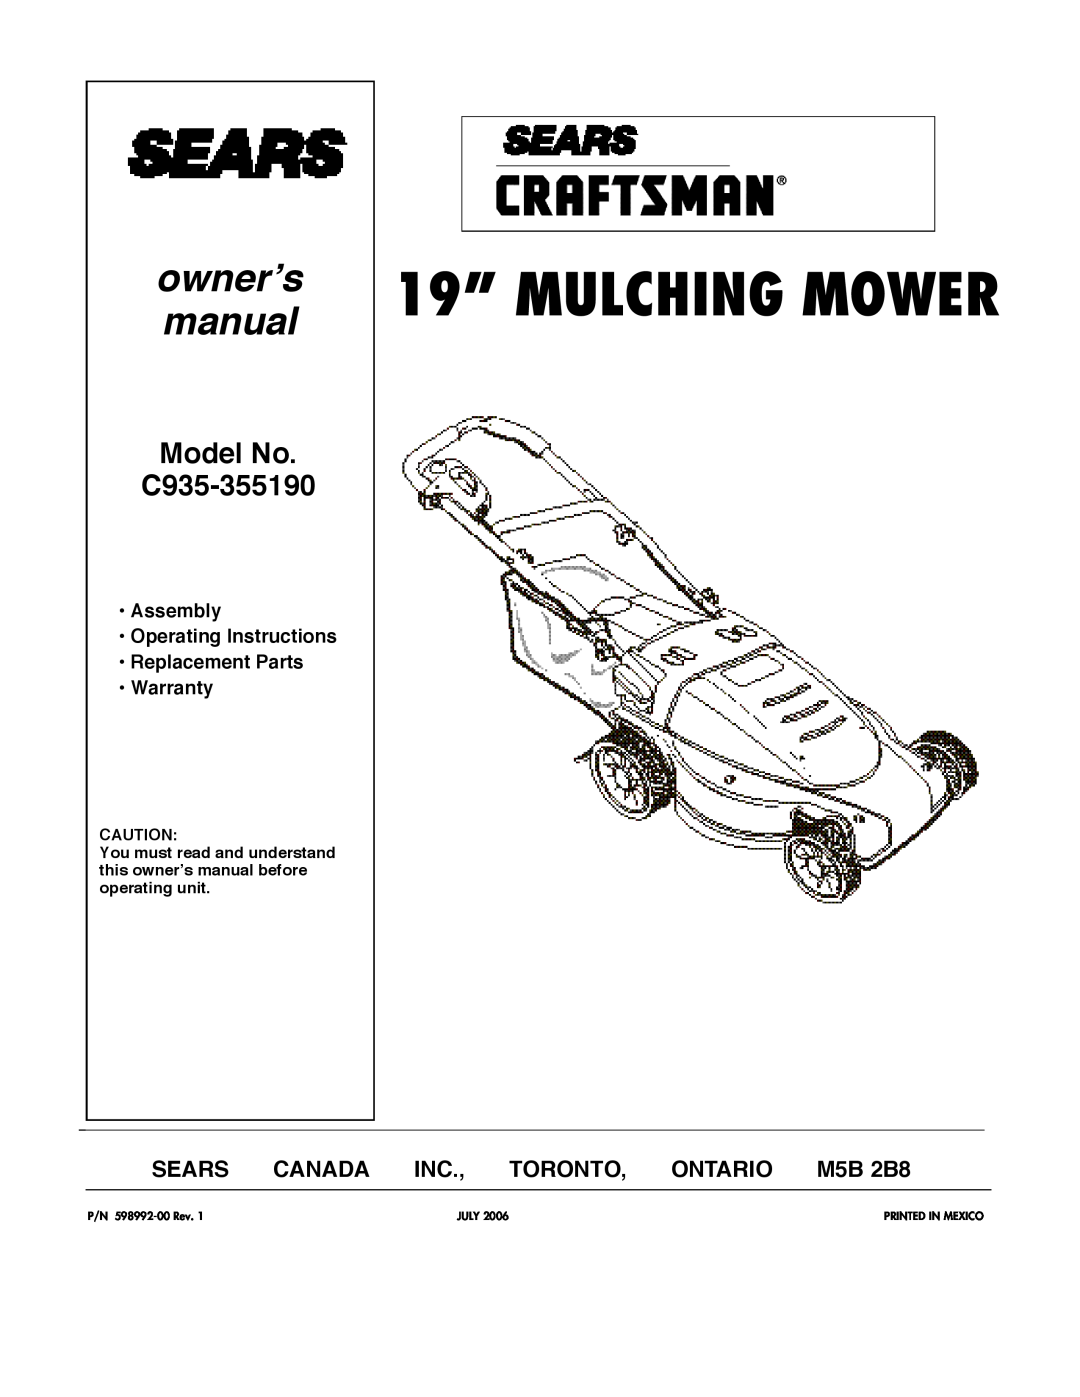 DeWalt owner manual owner’s, Model No C935-355190, Assembly Operating Instructions Replacement Parts Warranty 